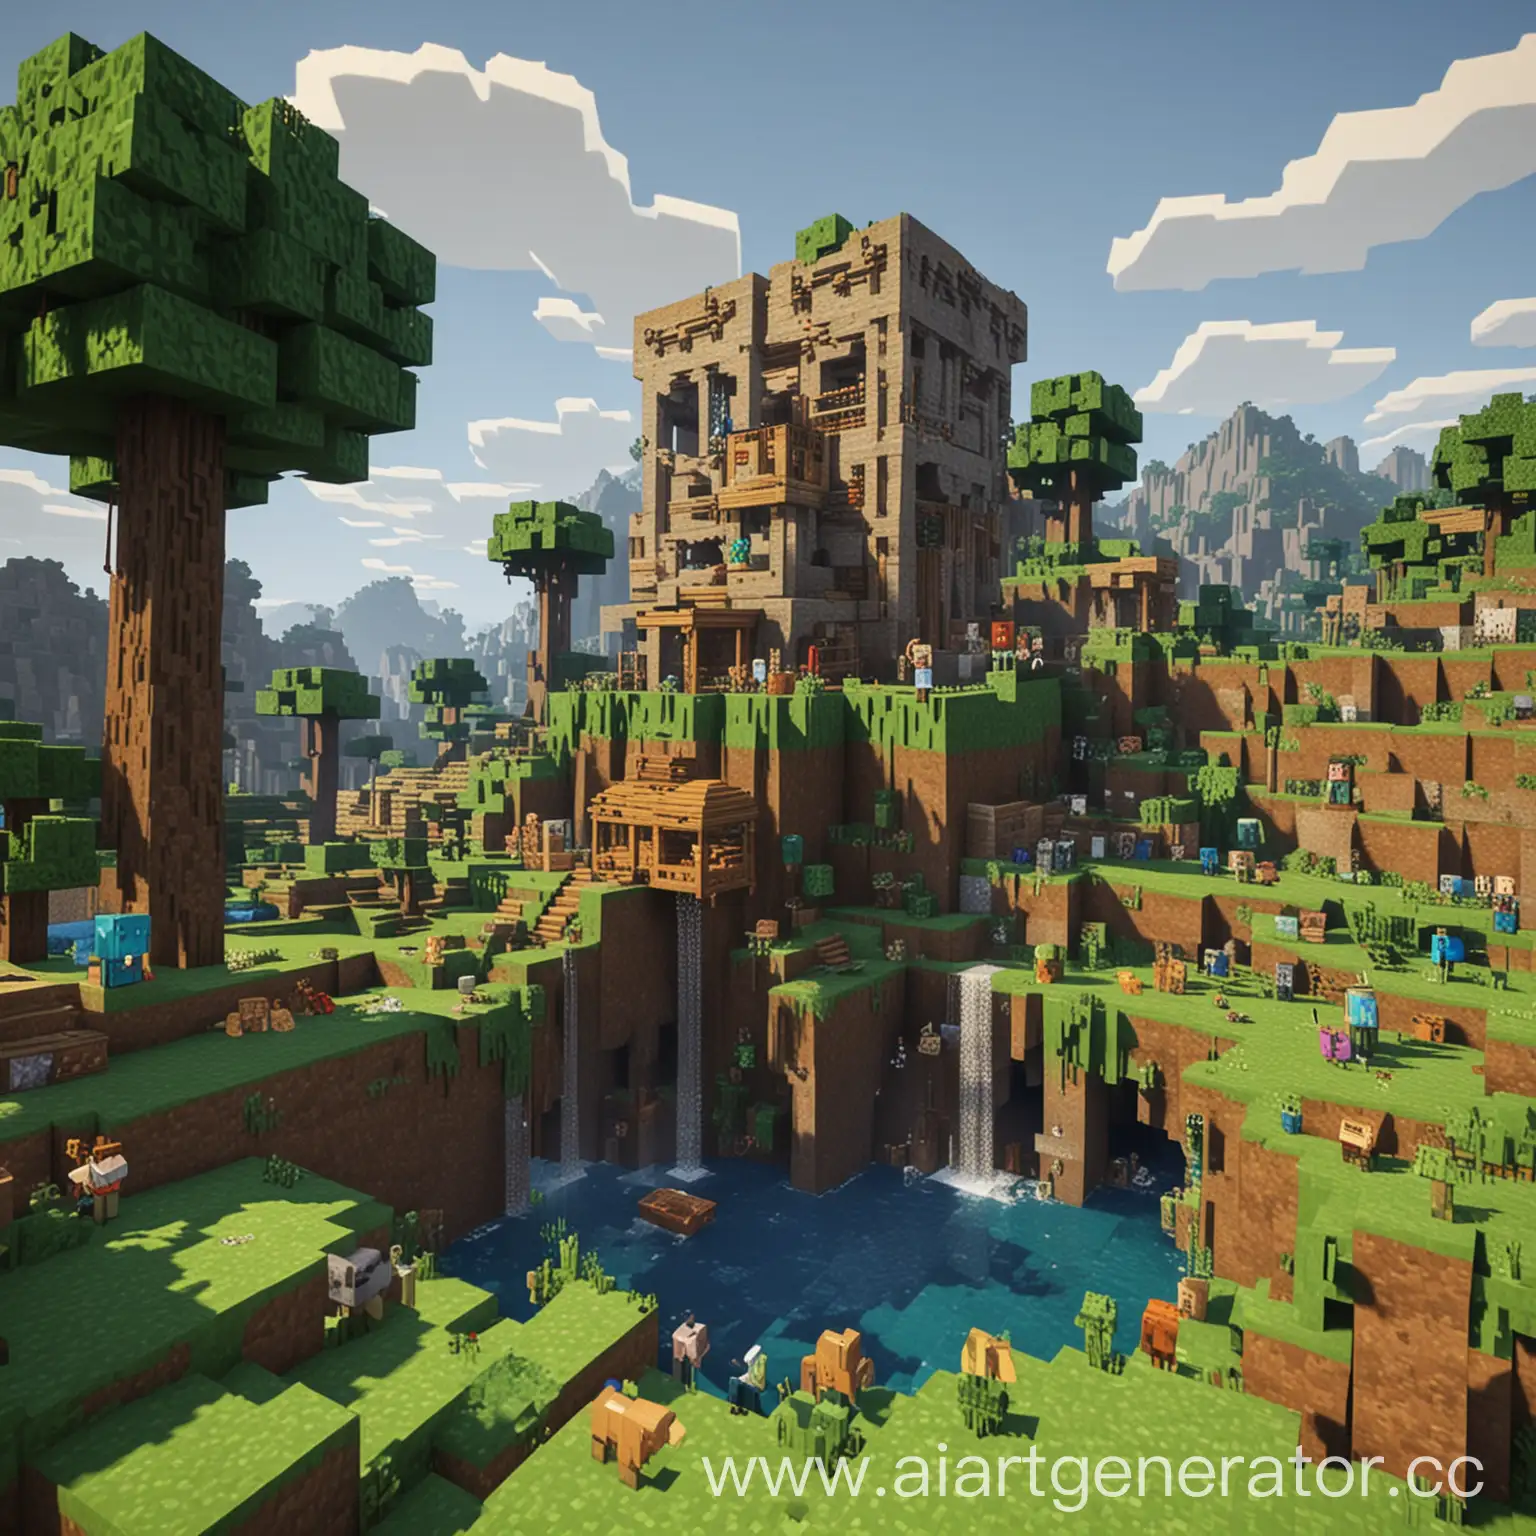 Colorful-Minecraft-Characters-Exploring-Pixelated-Worlds